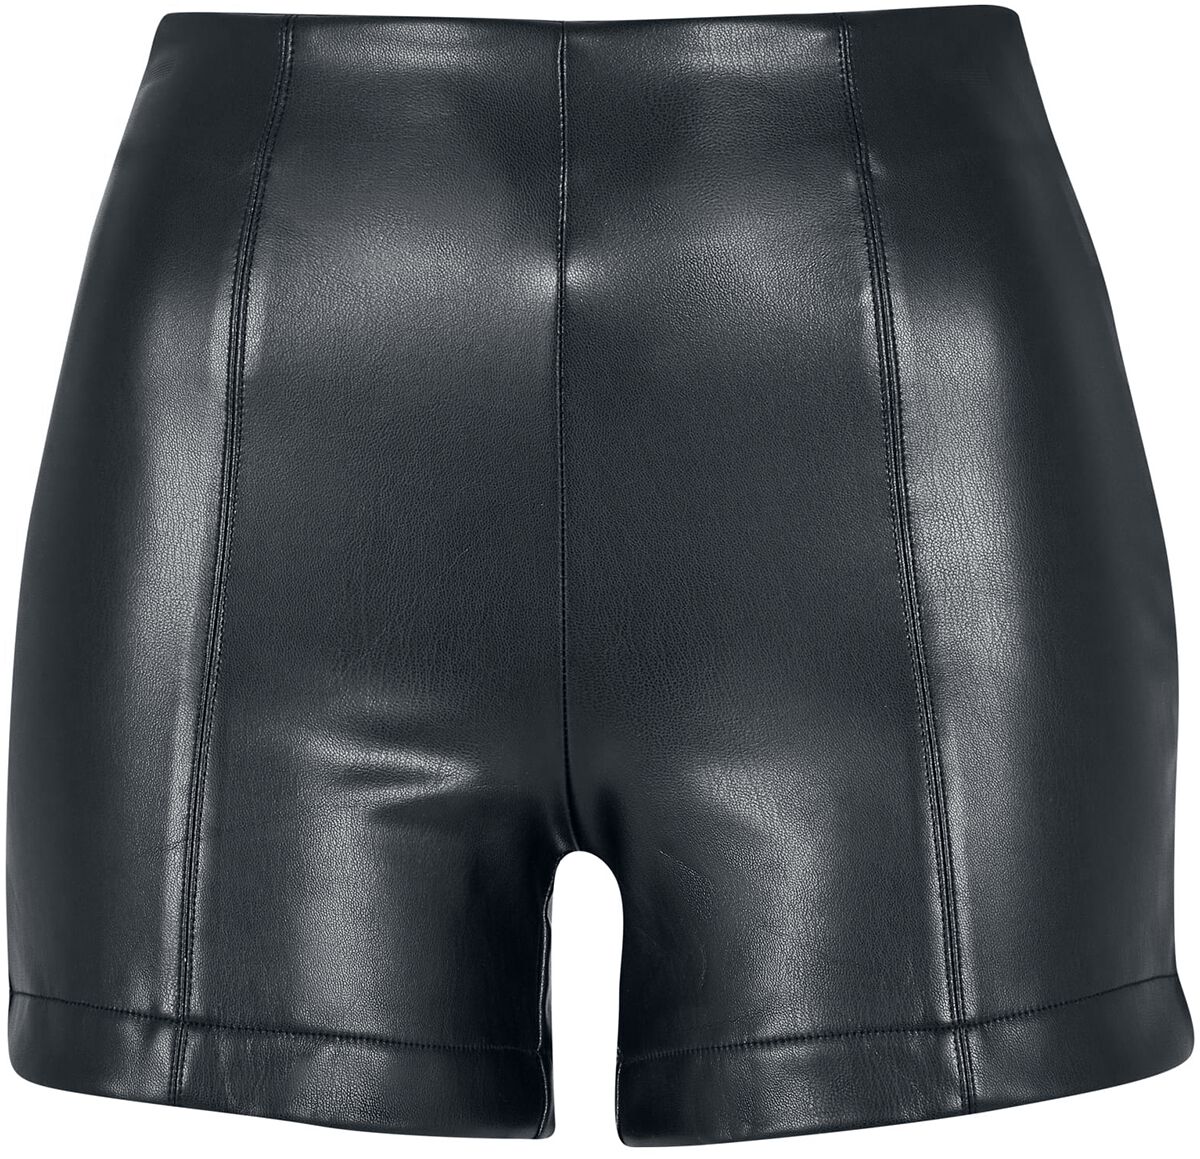 Image of Shorts di Urban Classics - Ladies’ faux-leather shorts - XS a XXL - Donna - nero